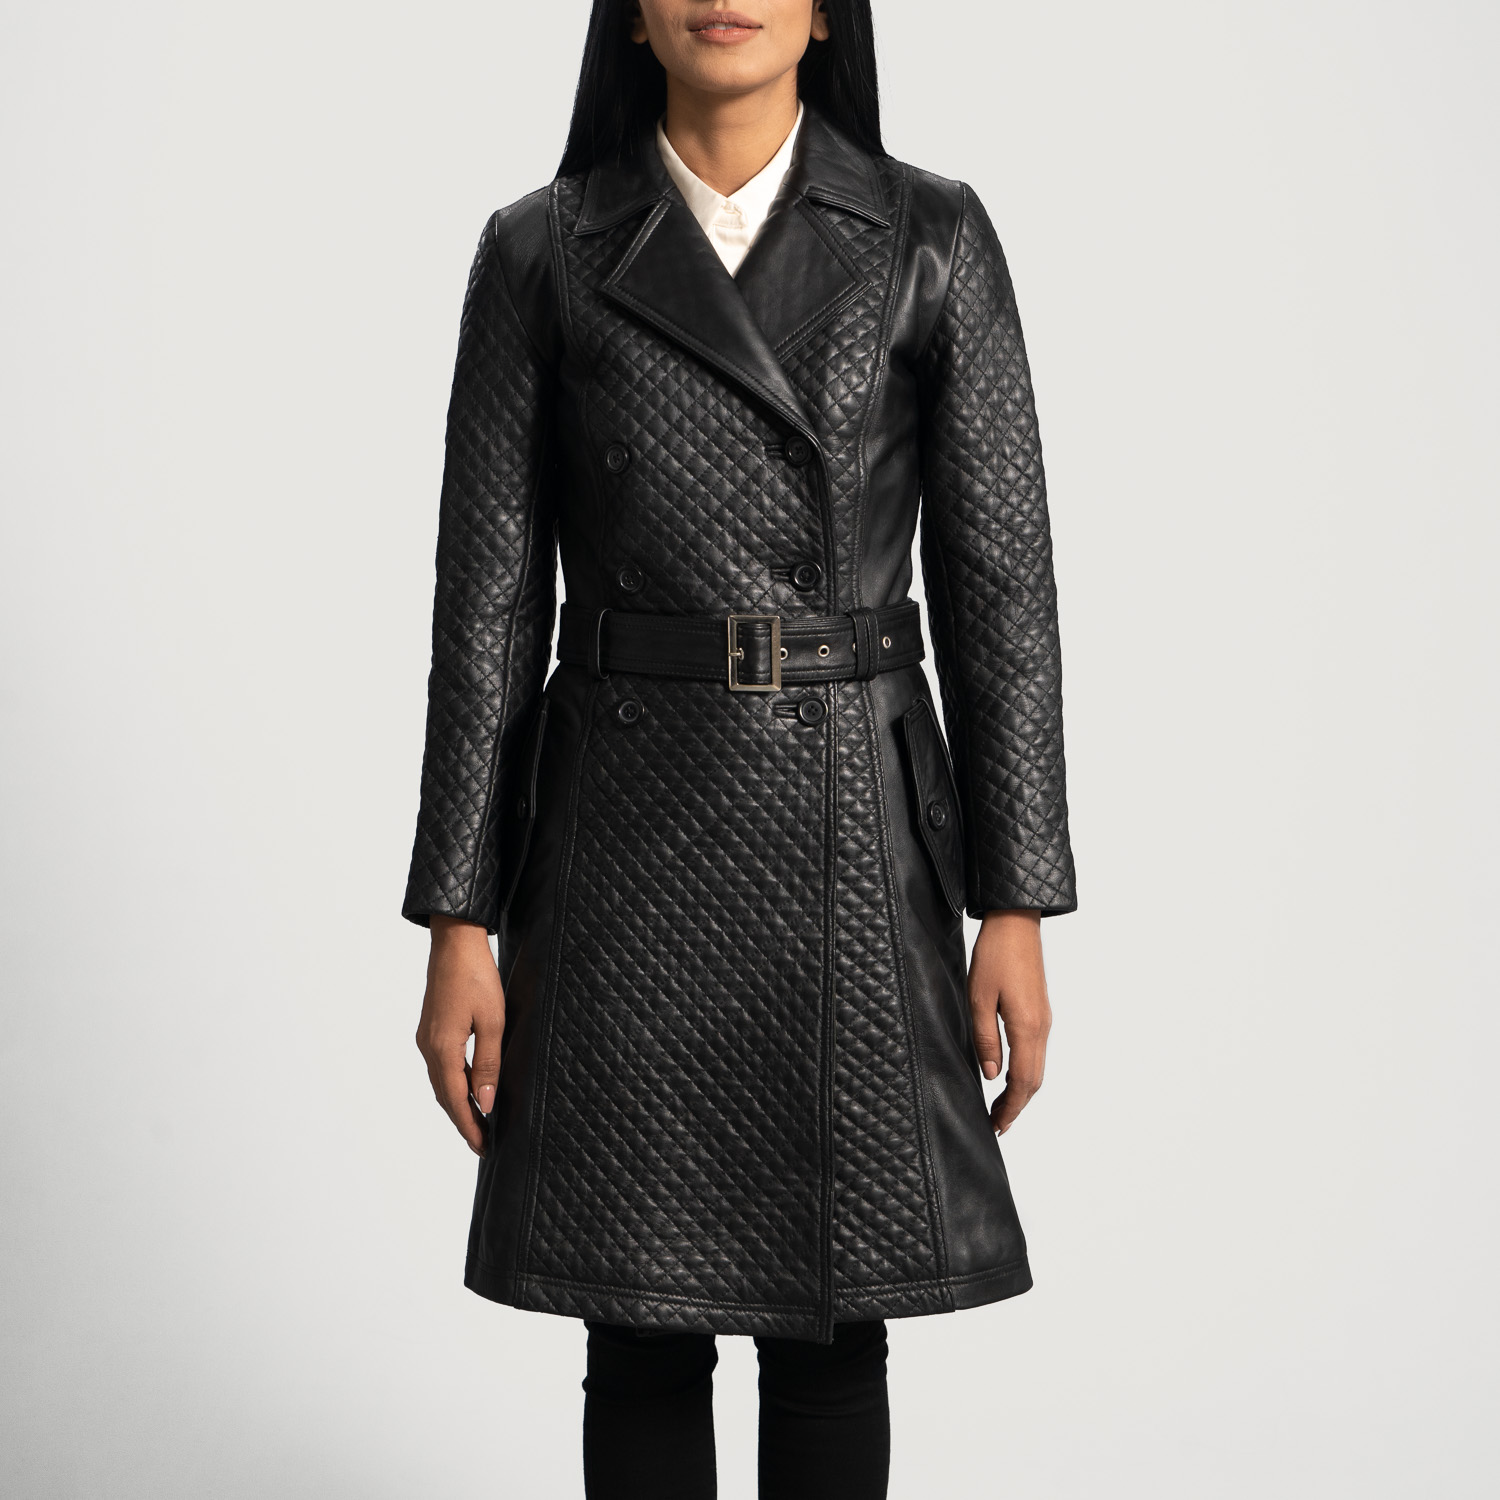 Sweet Susan Black Leather Trench Coat
